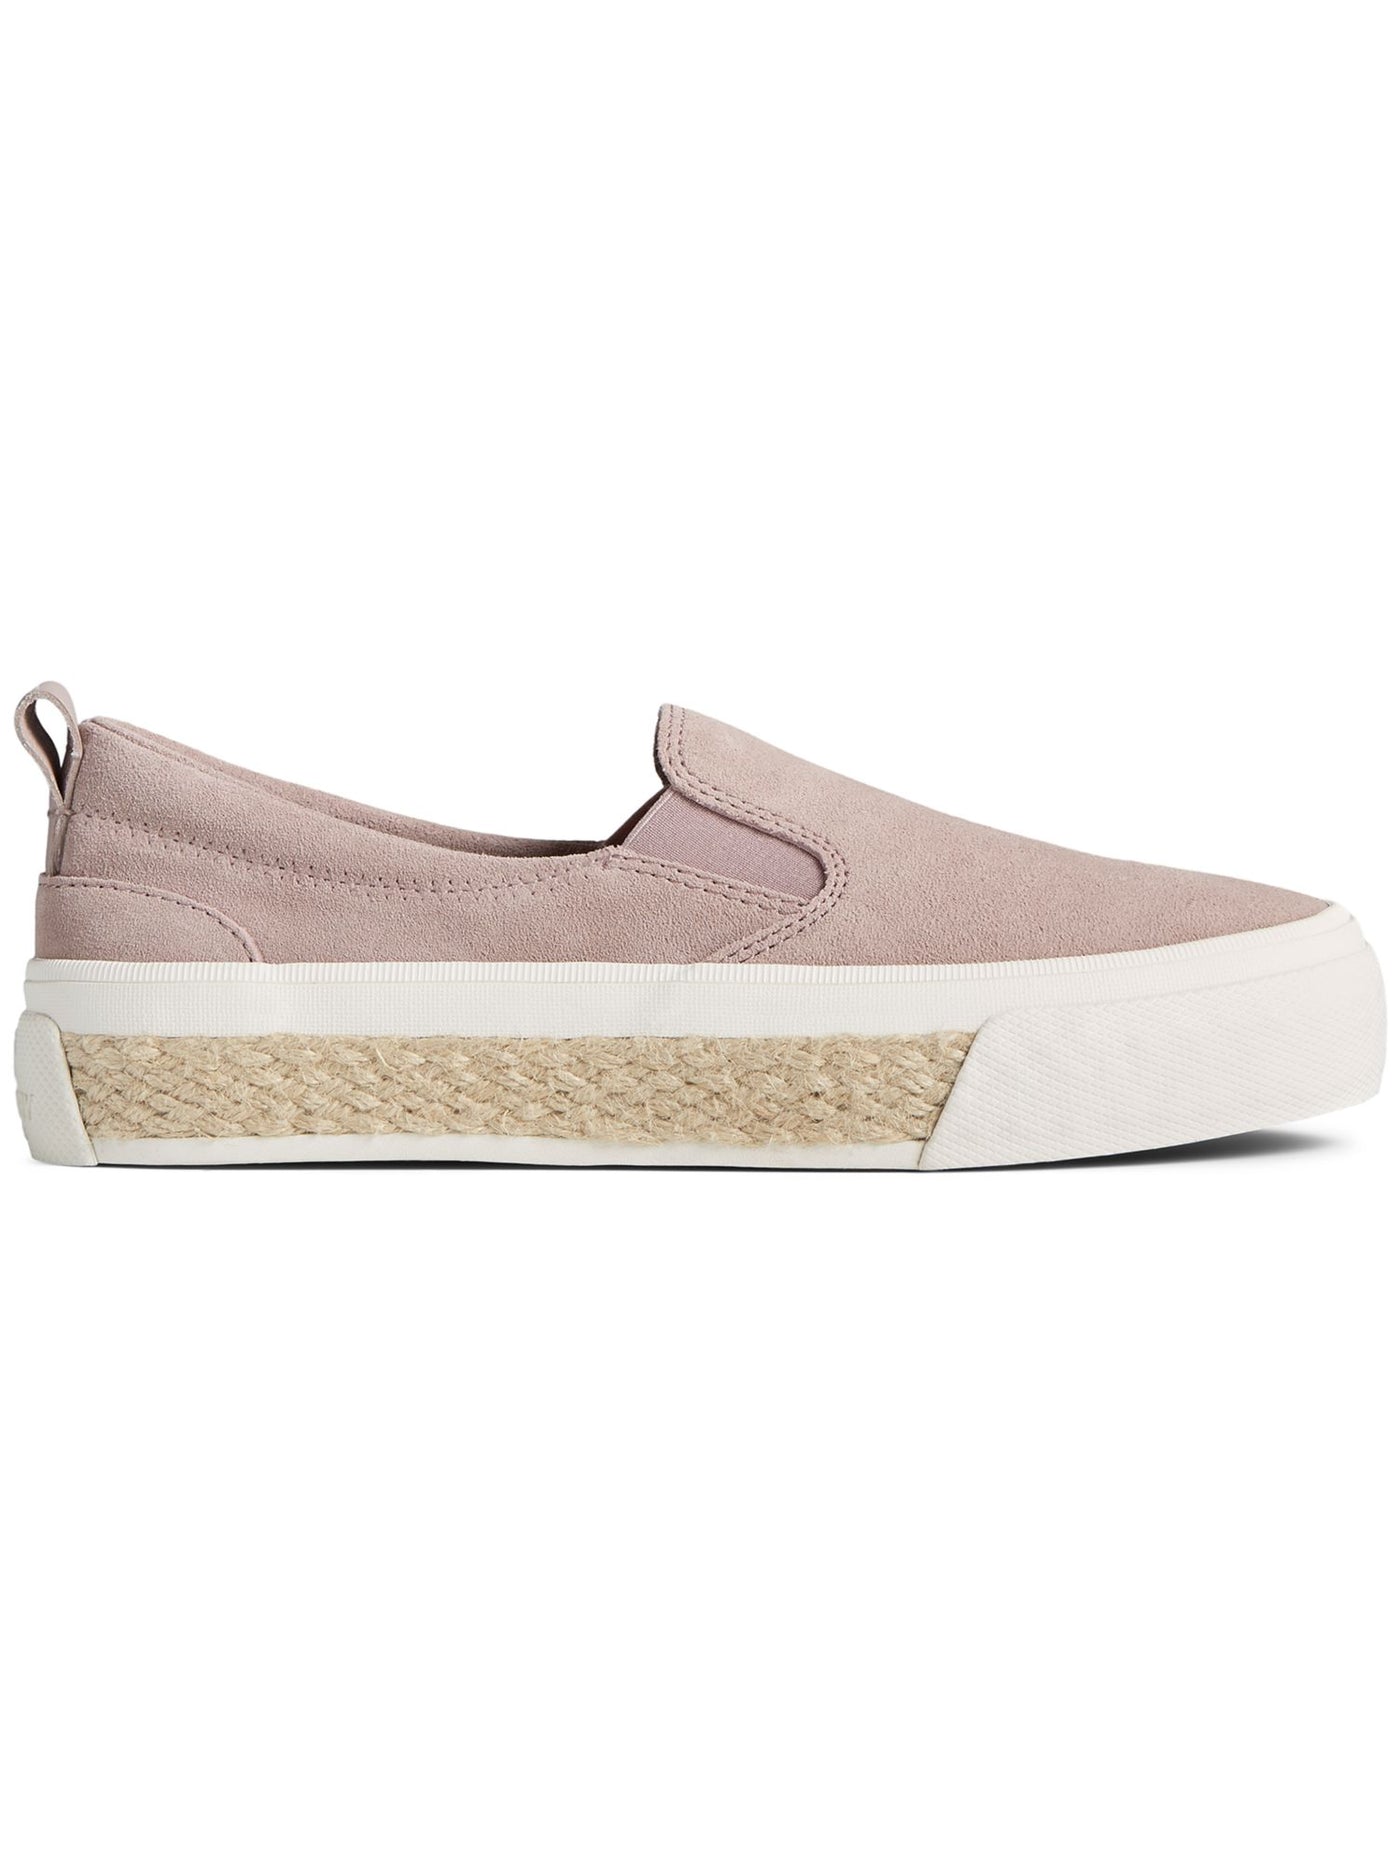 SPERRY Womens Pink Woven Goring Pull Tab Logo Cushioned Slip Resistant Twin Gore Round Toe Platform Slip On Leather Sneakers Shoes 11 M